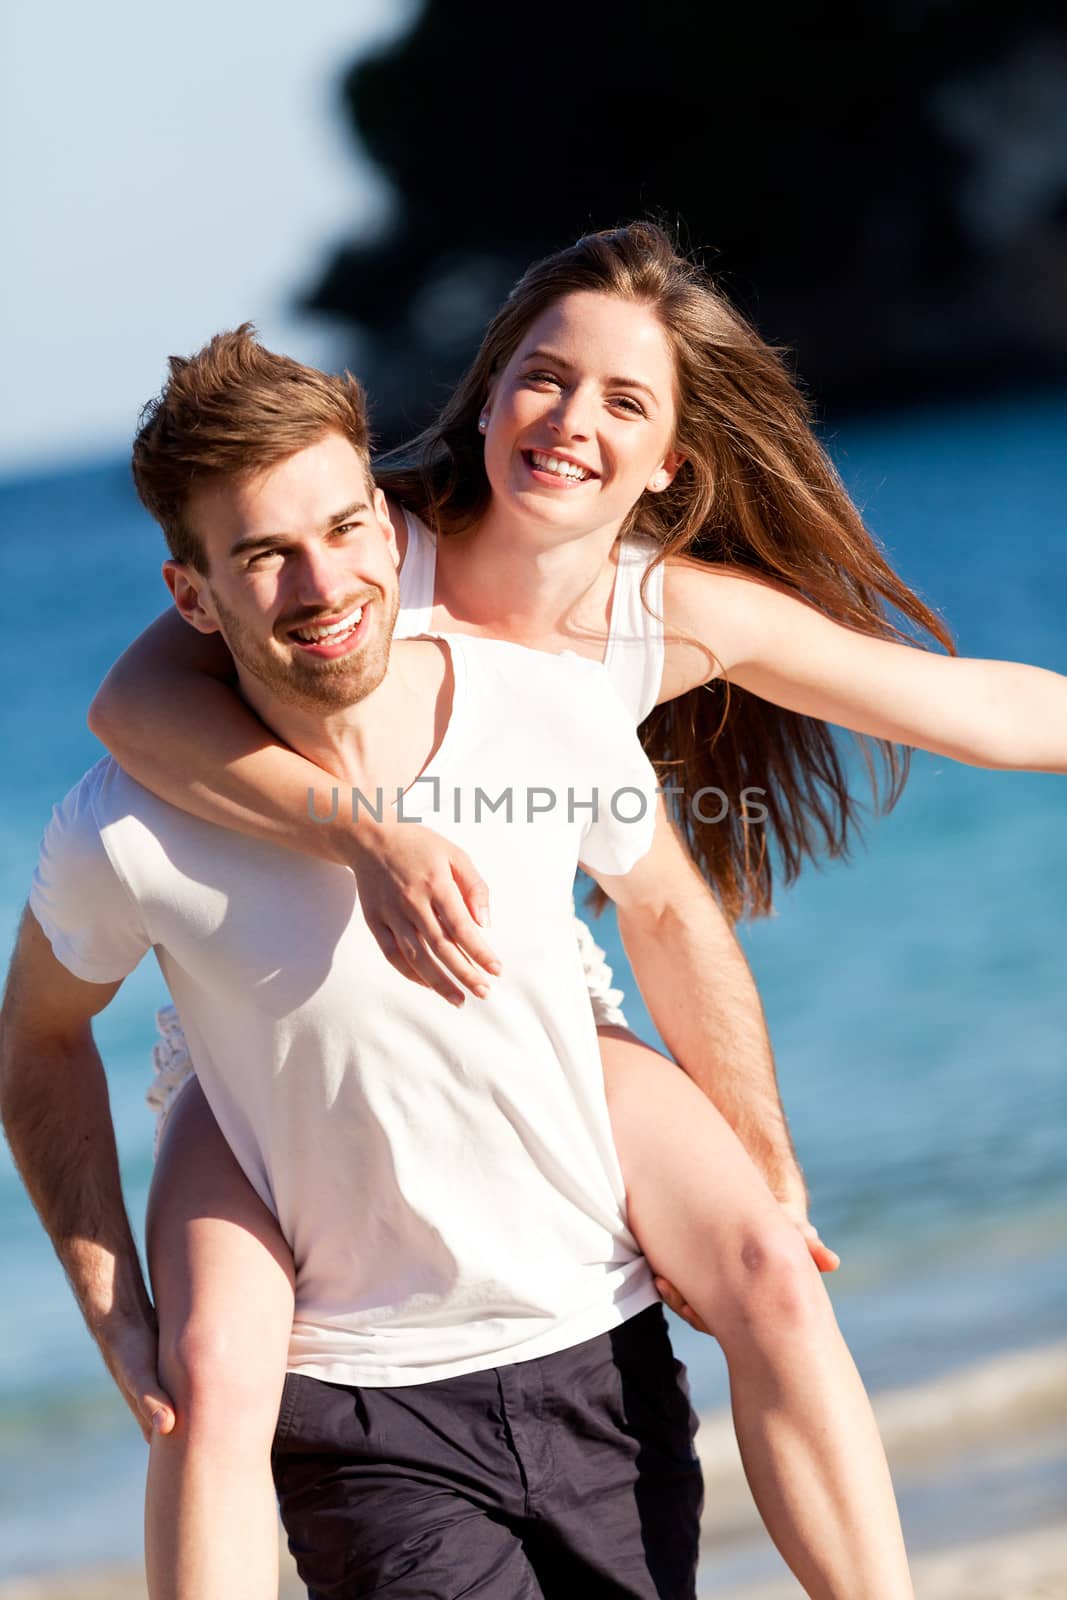 happy young couple on the beach in summer holiday love togetherness